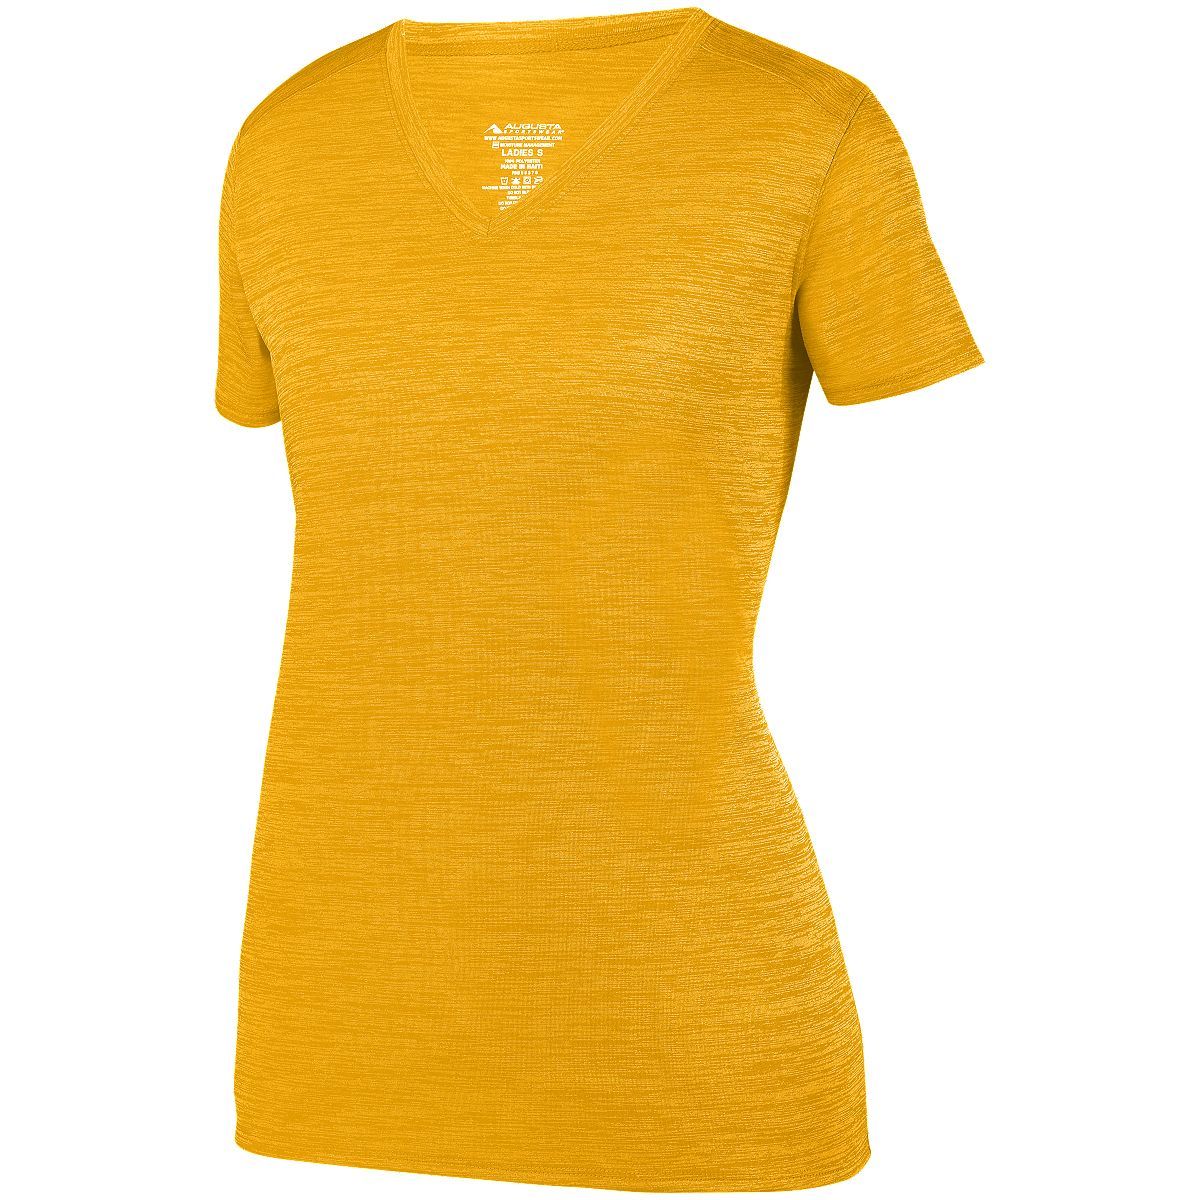 Augusta Sportswear Ladies Shadow Tonal Heather Training Tee in Gold  -Part of the Ladies, Ladies-Tee-Shirt, T-Shirts, Augusta-Products, Shirts, Tonal-Fleece-Collection product lines at KanaleyCreations.com